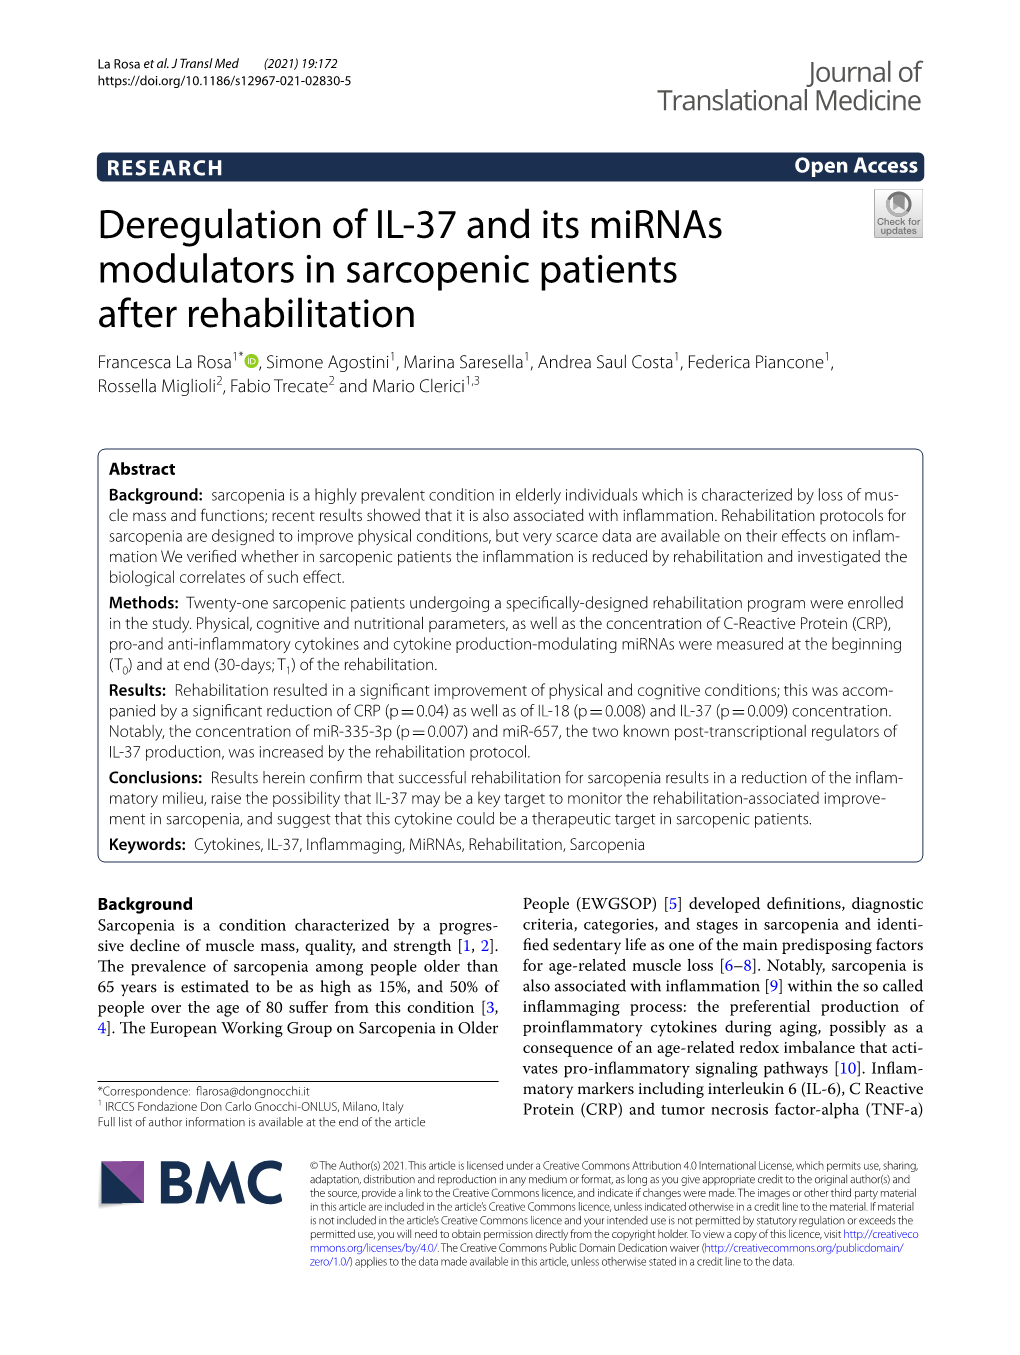 Deregulation of IL-37 and Its Mirnas Modulators in Sarcopenic Patients